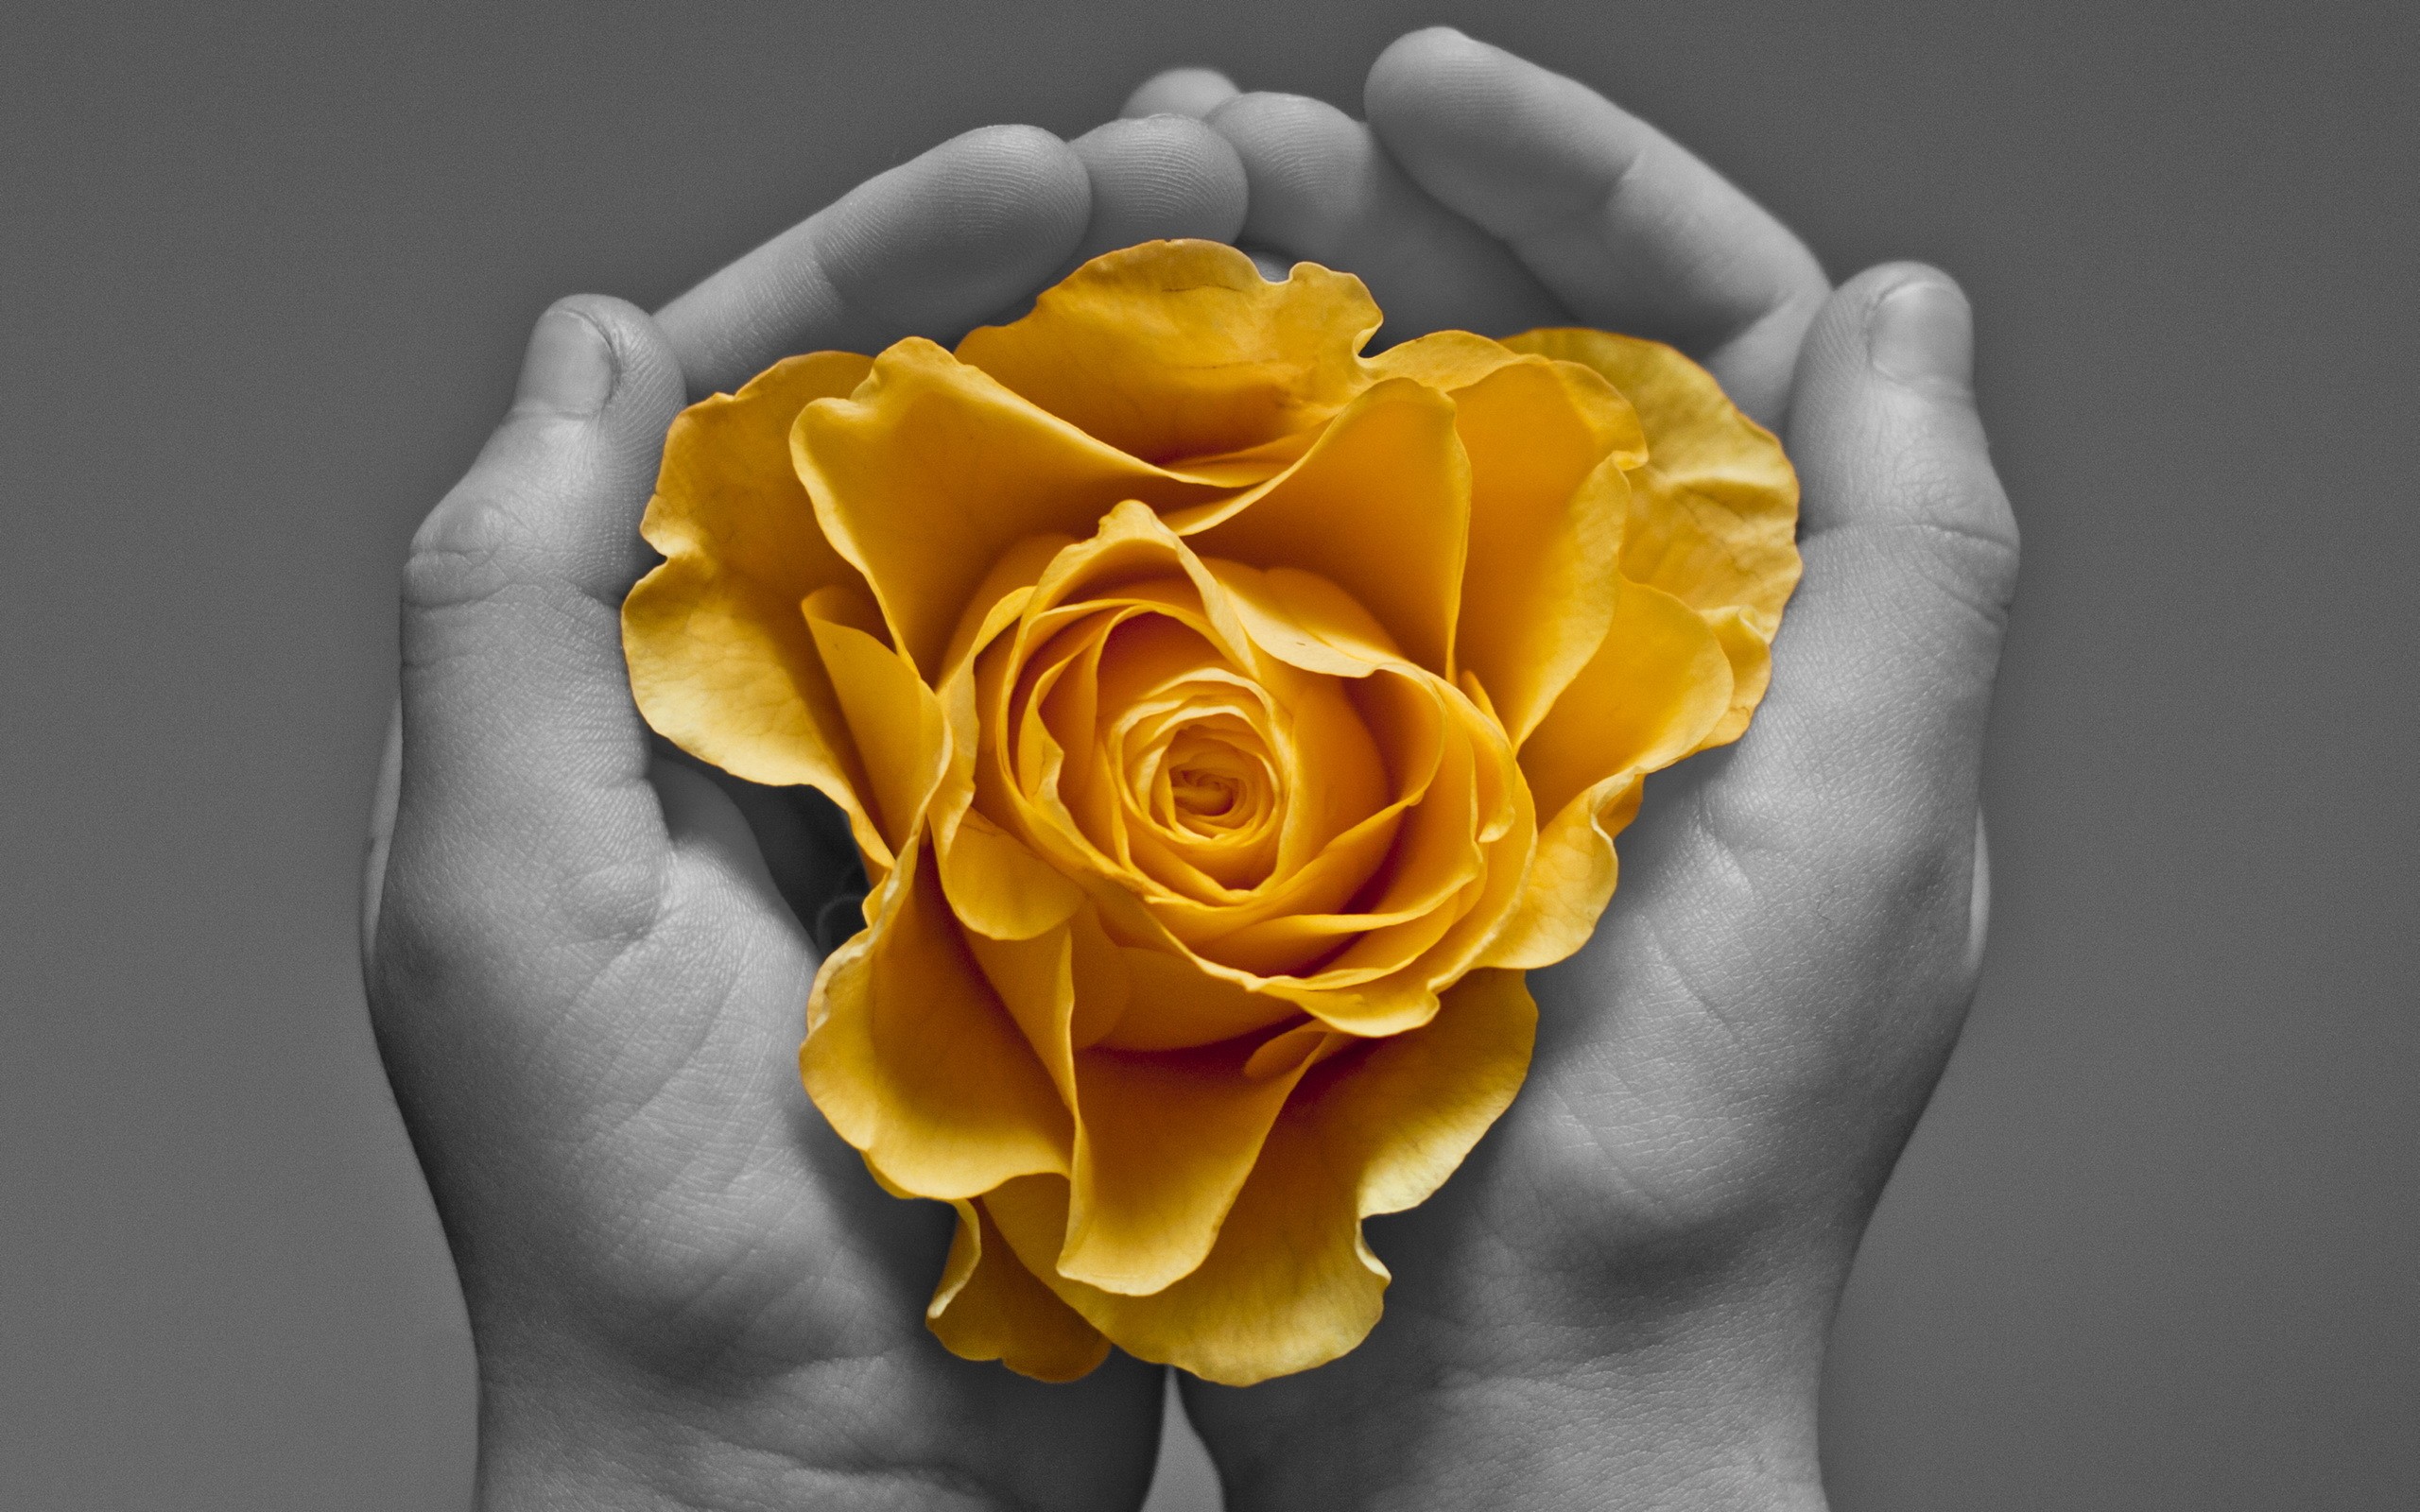 General 2560x1600 hands selective coloring flowers rose yellow flowers plants